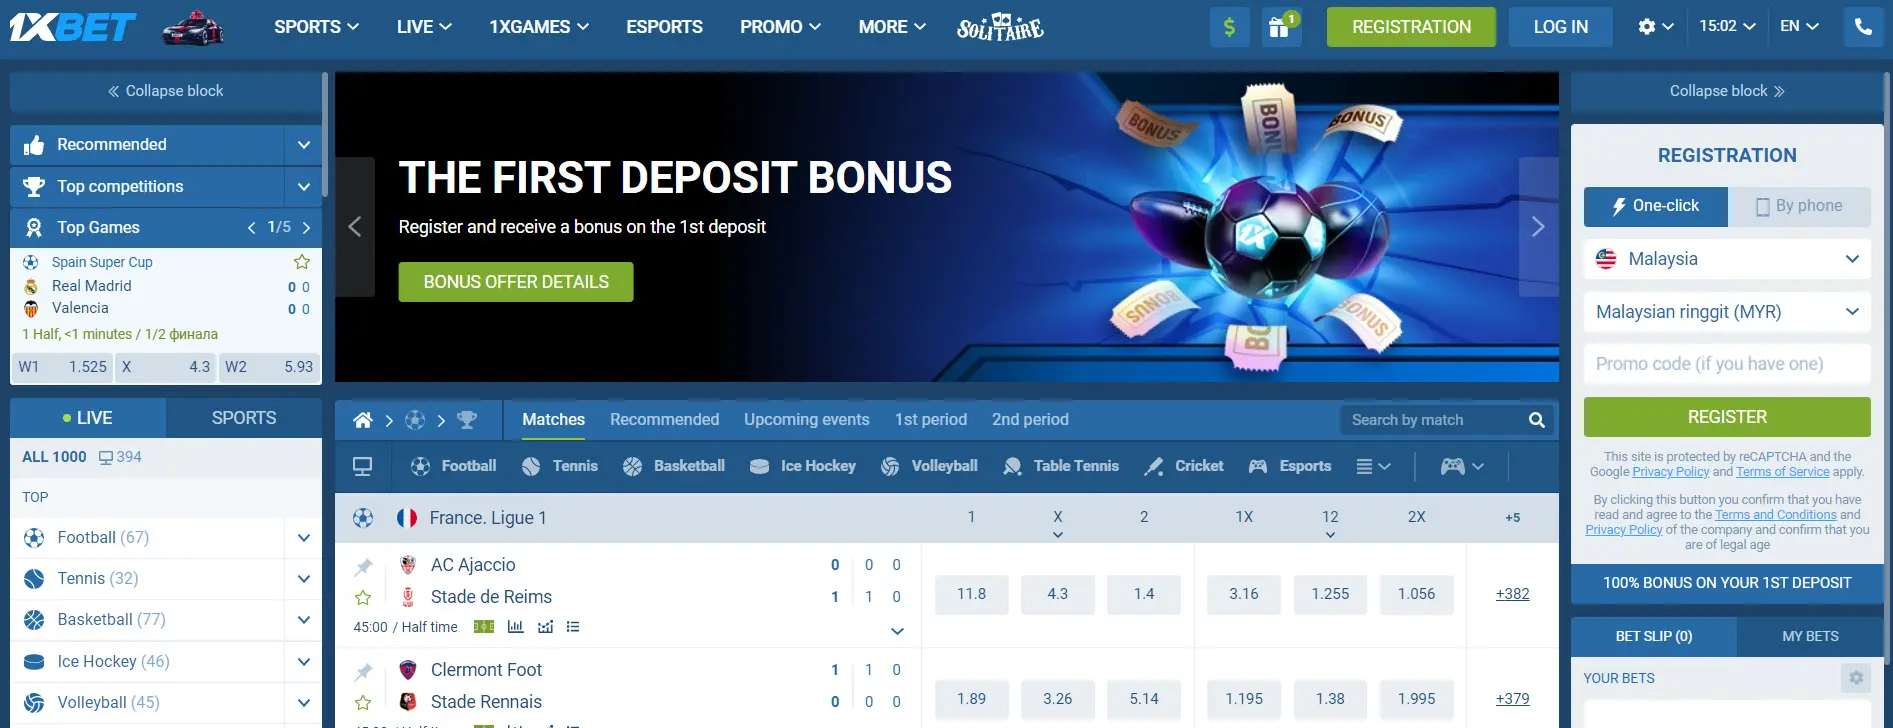 22 Tips To Start Building A asian bookies, asian bookmakers, online betting malaysia, asian betting sites, best asian bookmakers, asian sports bookmakers, sports betting malaysia, online sports betting malaysia, singapore online sportsbook You Always Wanted